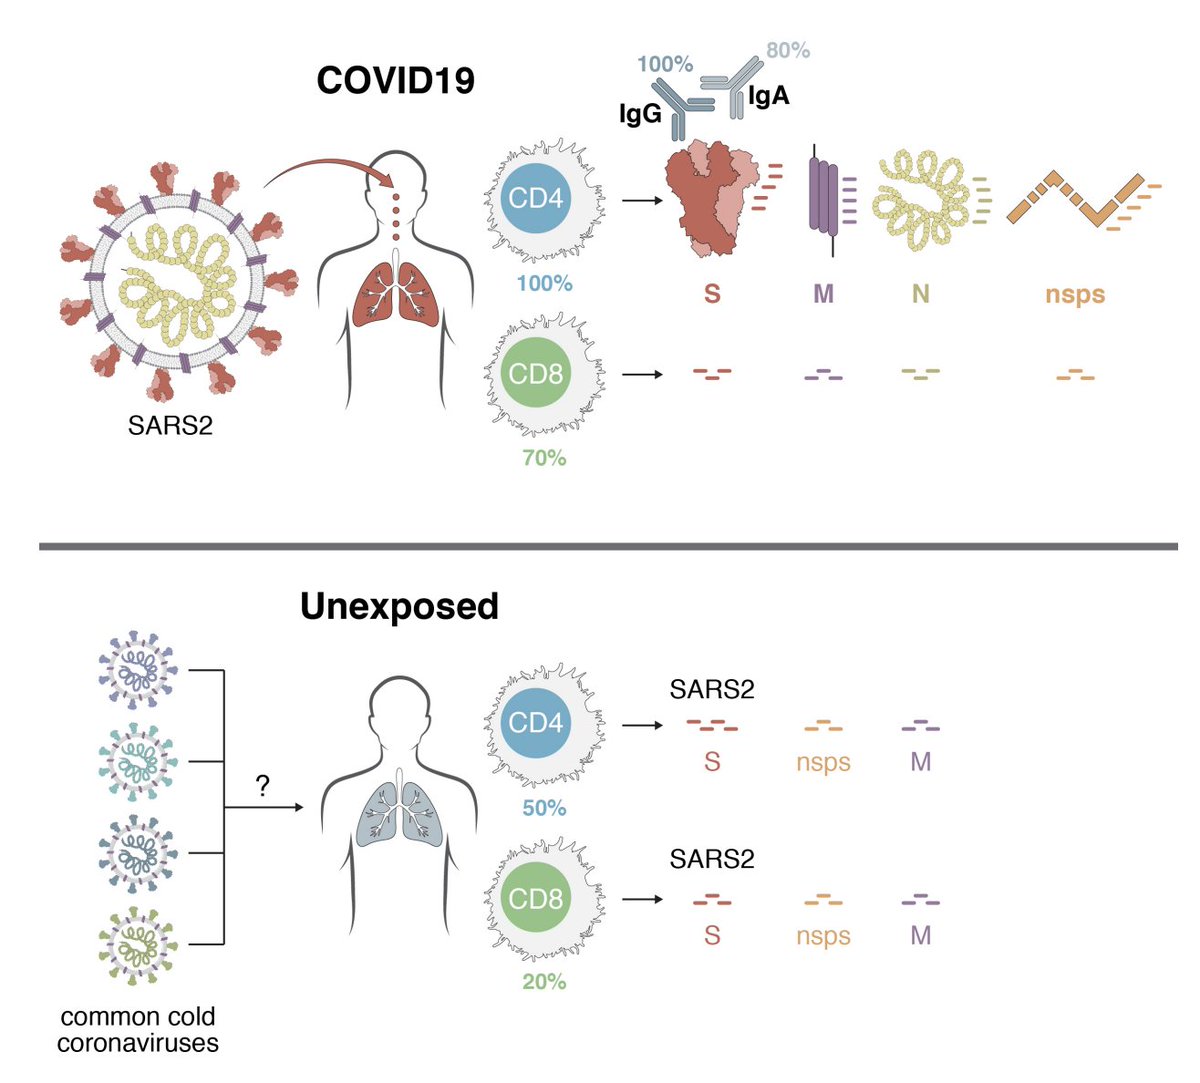 11/ In their discussion they note that a COVID-19 vaccine consisting of Spike protein would likely be able to elicit spike CD4+ T-cell responses but that adding other antigens such as M and N would better mimic responses in convalescing patients